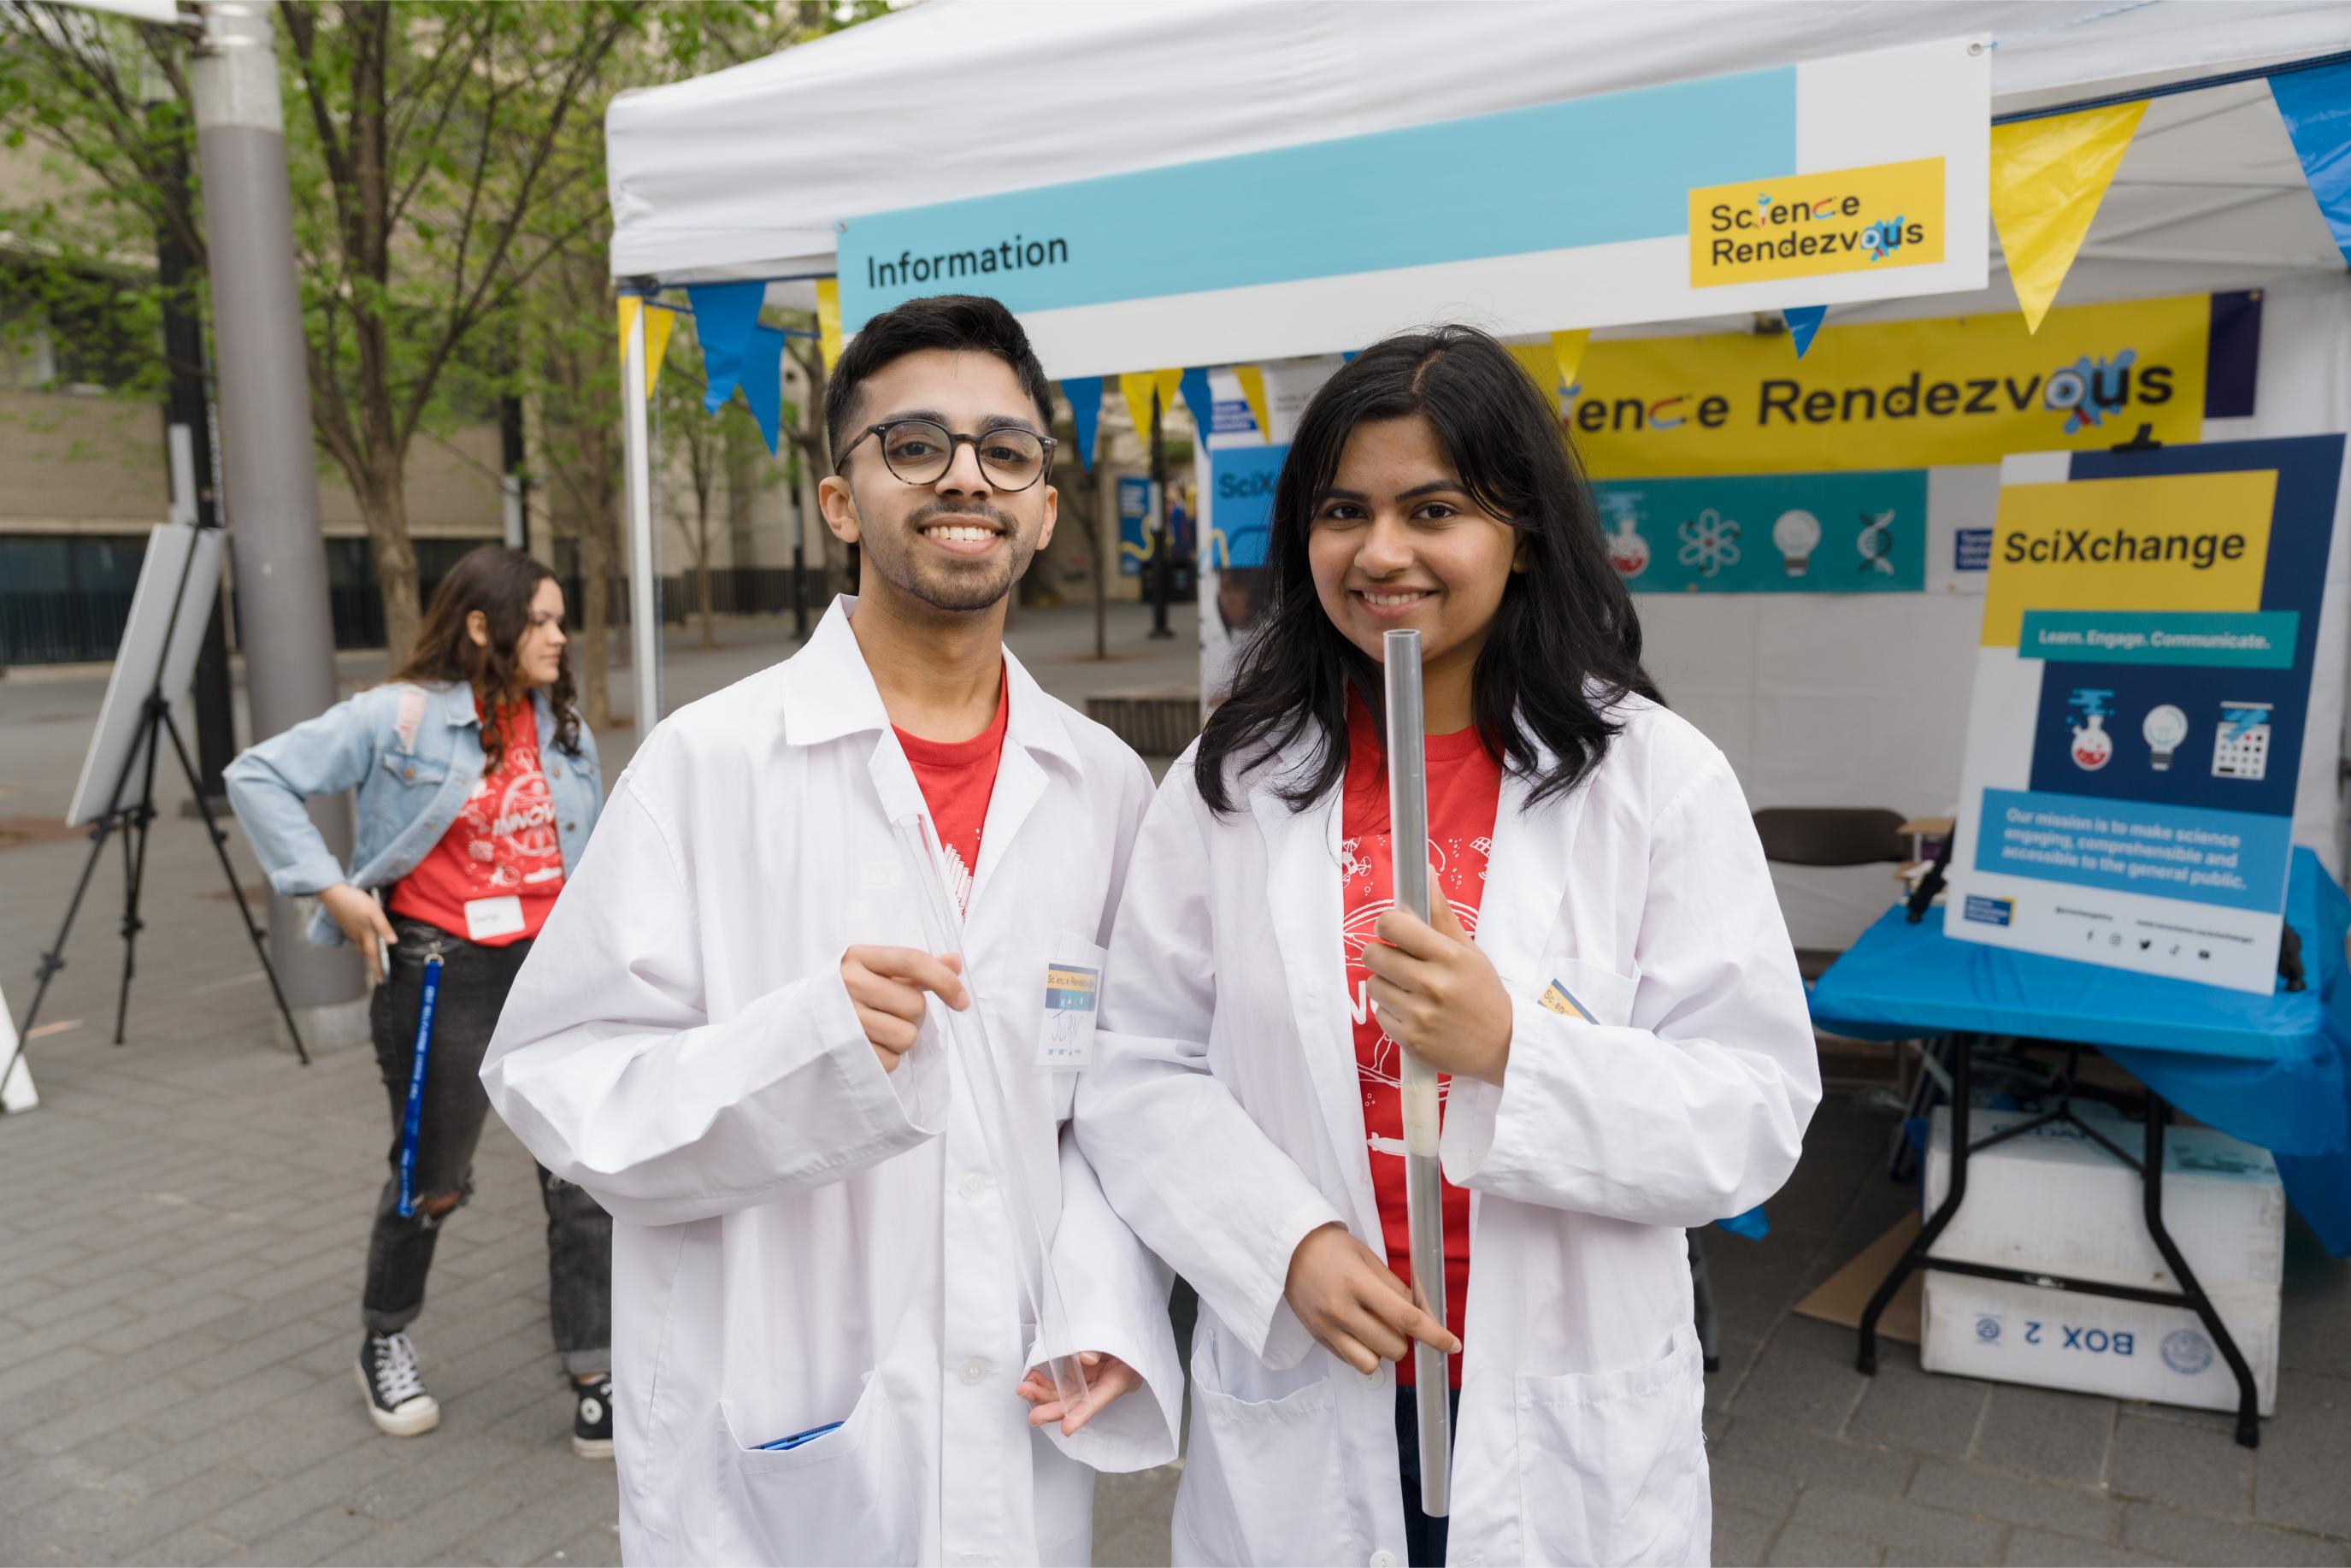 Two pocket science volunteers in white lab coats holding two clear cylinders are posing and smiling at the camera.